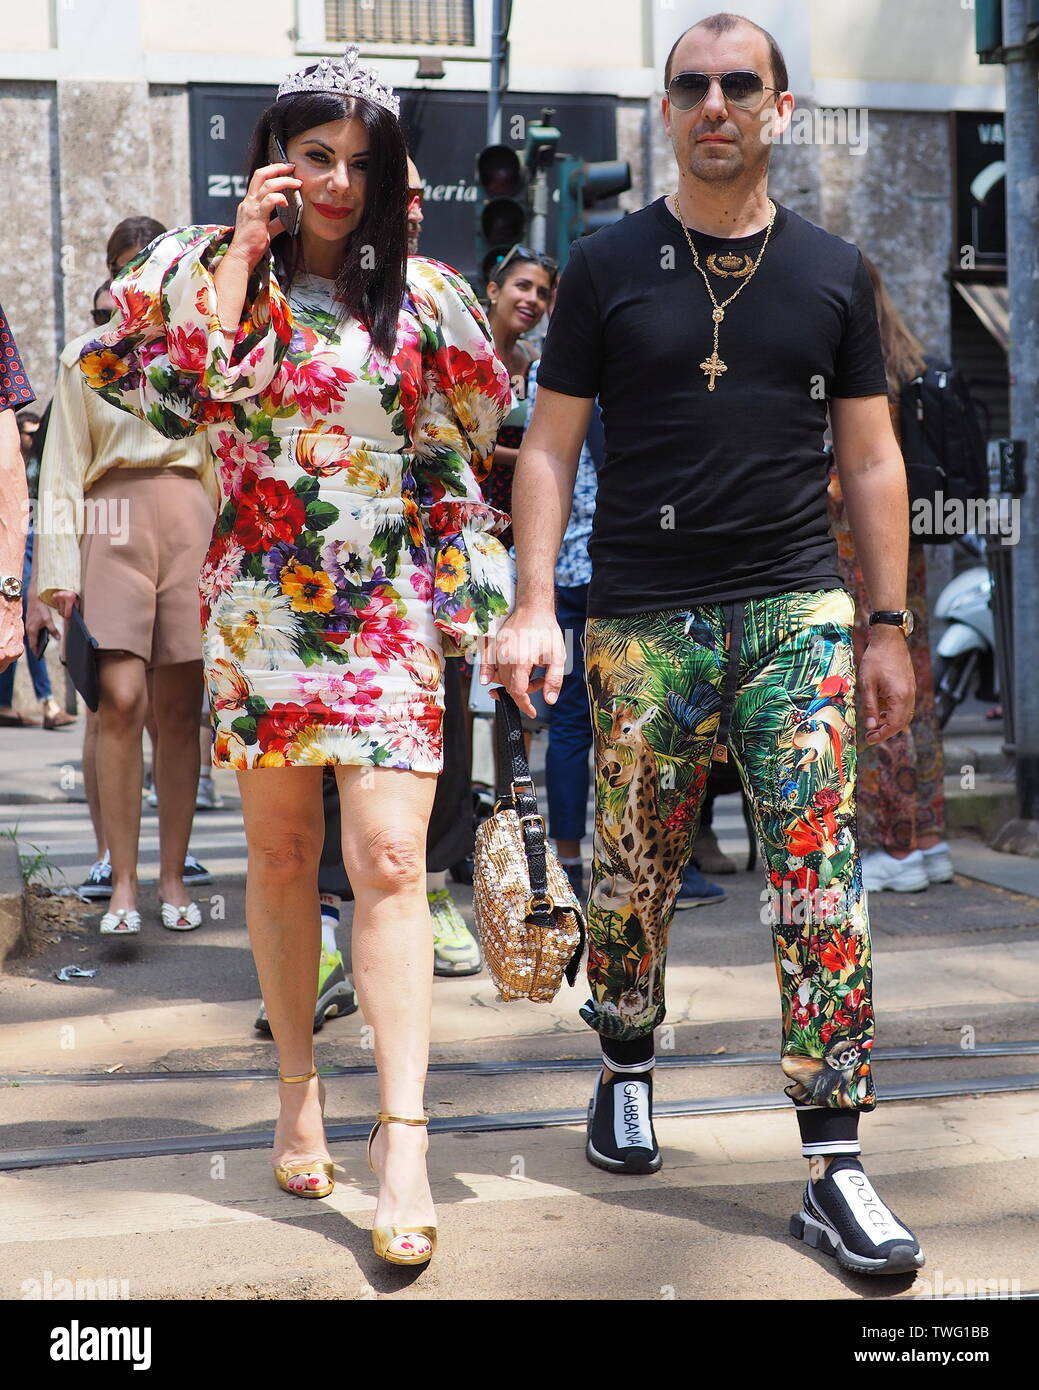 MILANO, Italy: 15 June 2019: Fashionable couple street style outfits before  Dolce & Gabbana fashion show during Milano Fashion Week man 2019/2020 Stock  Photo - Alamy